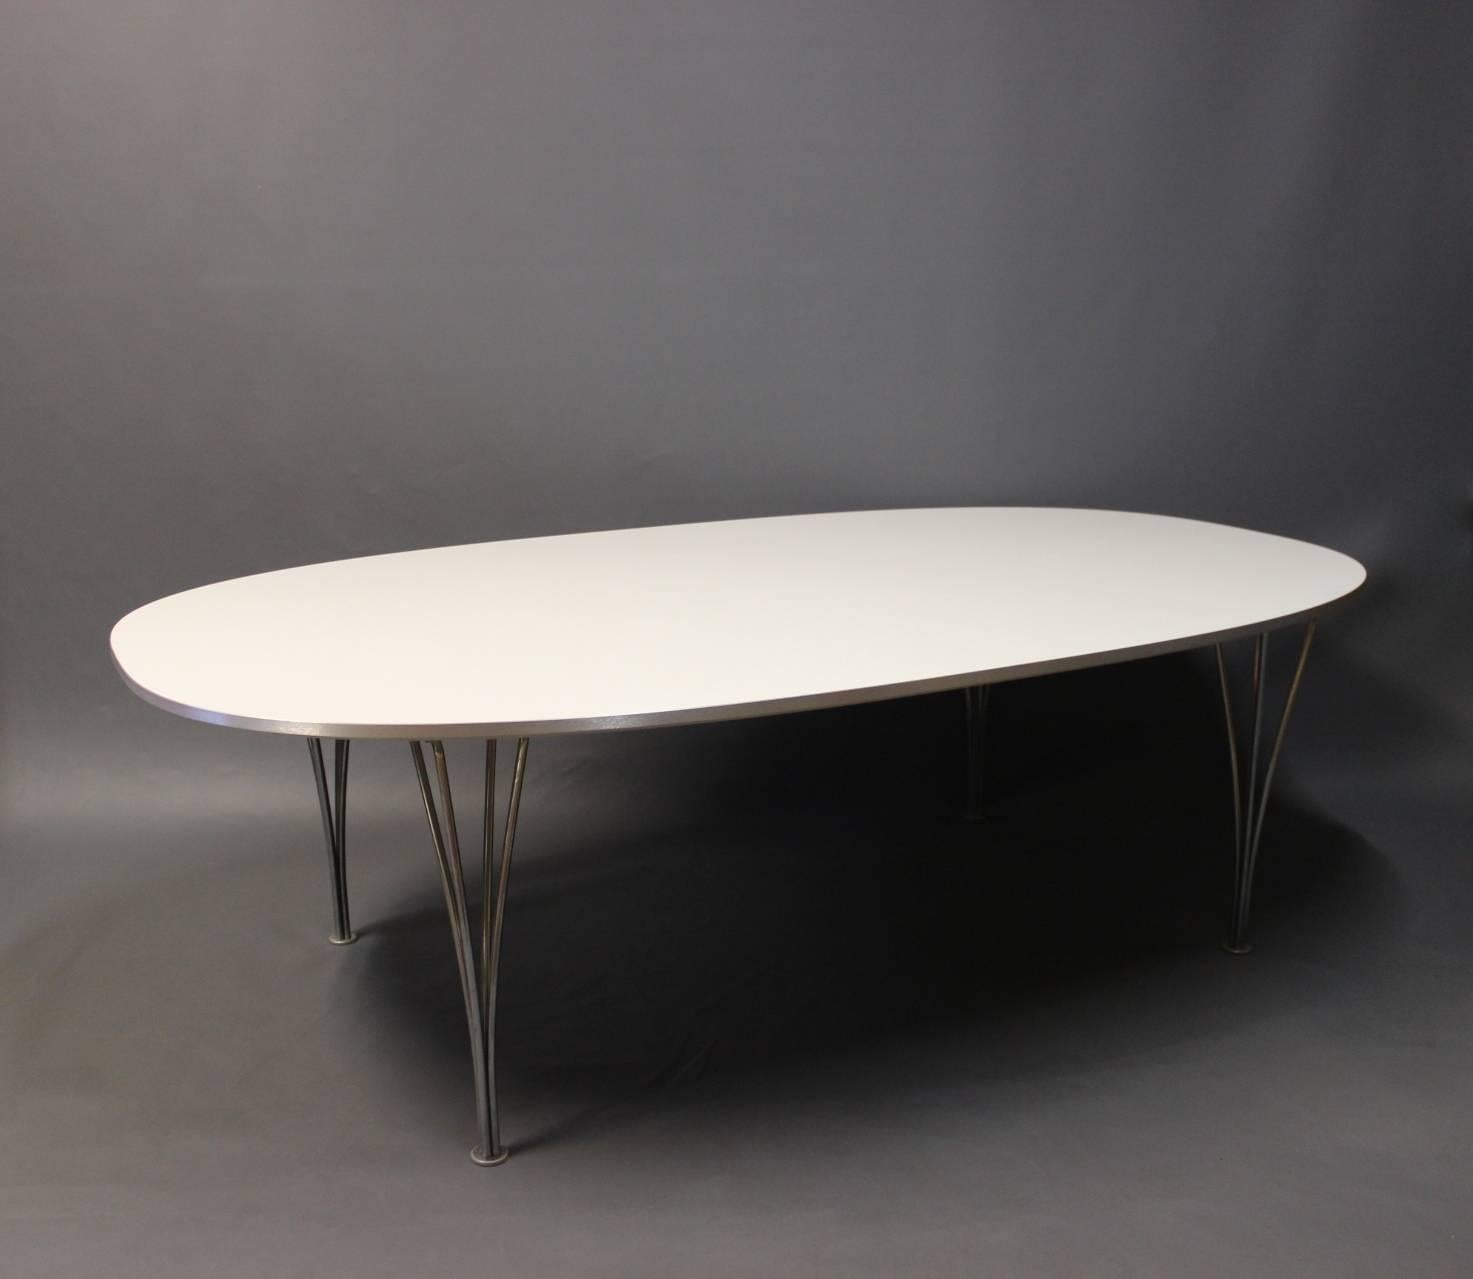 Superellipse Piet Hein coffee table designed by Arne Jacobsen, Piet Hein and Bruno Mathsson and manufactured by Fritz Hansen in 2011. The table is with white laminate and aluminum edge and a rare model.